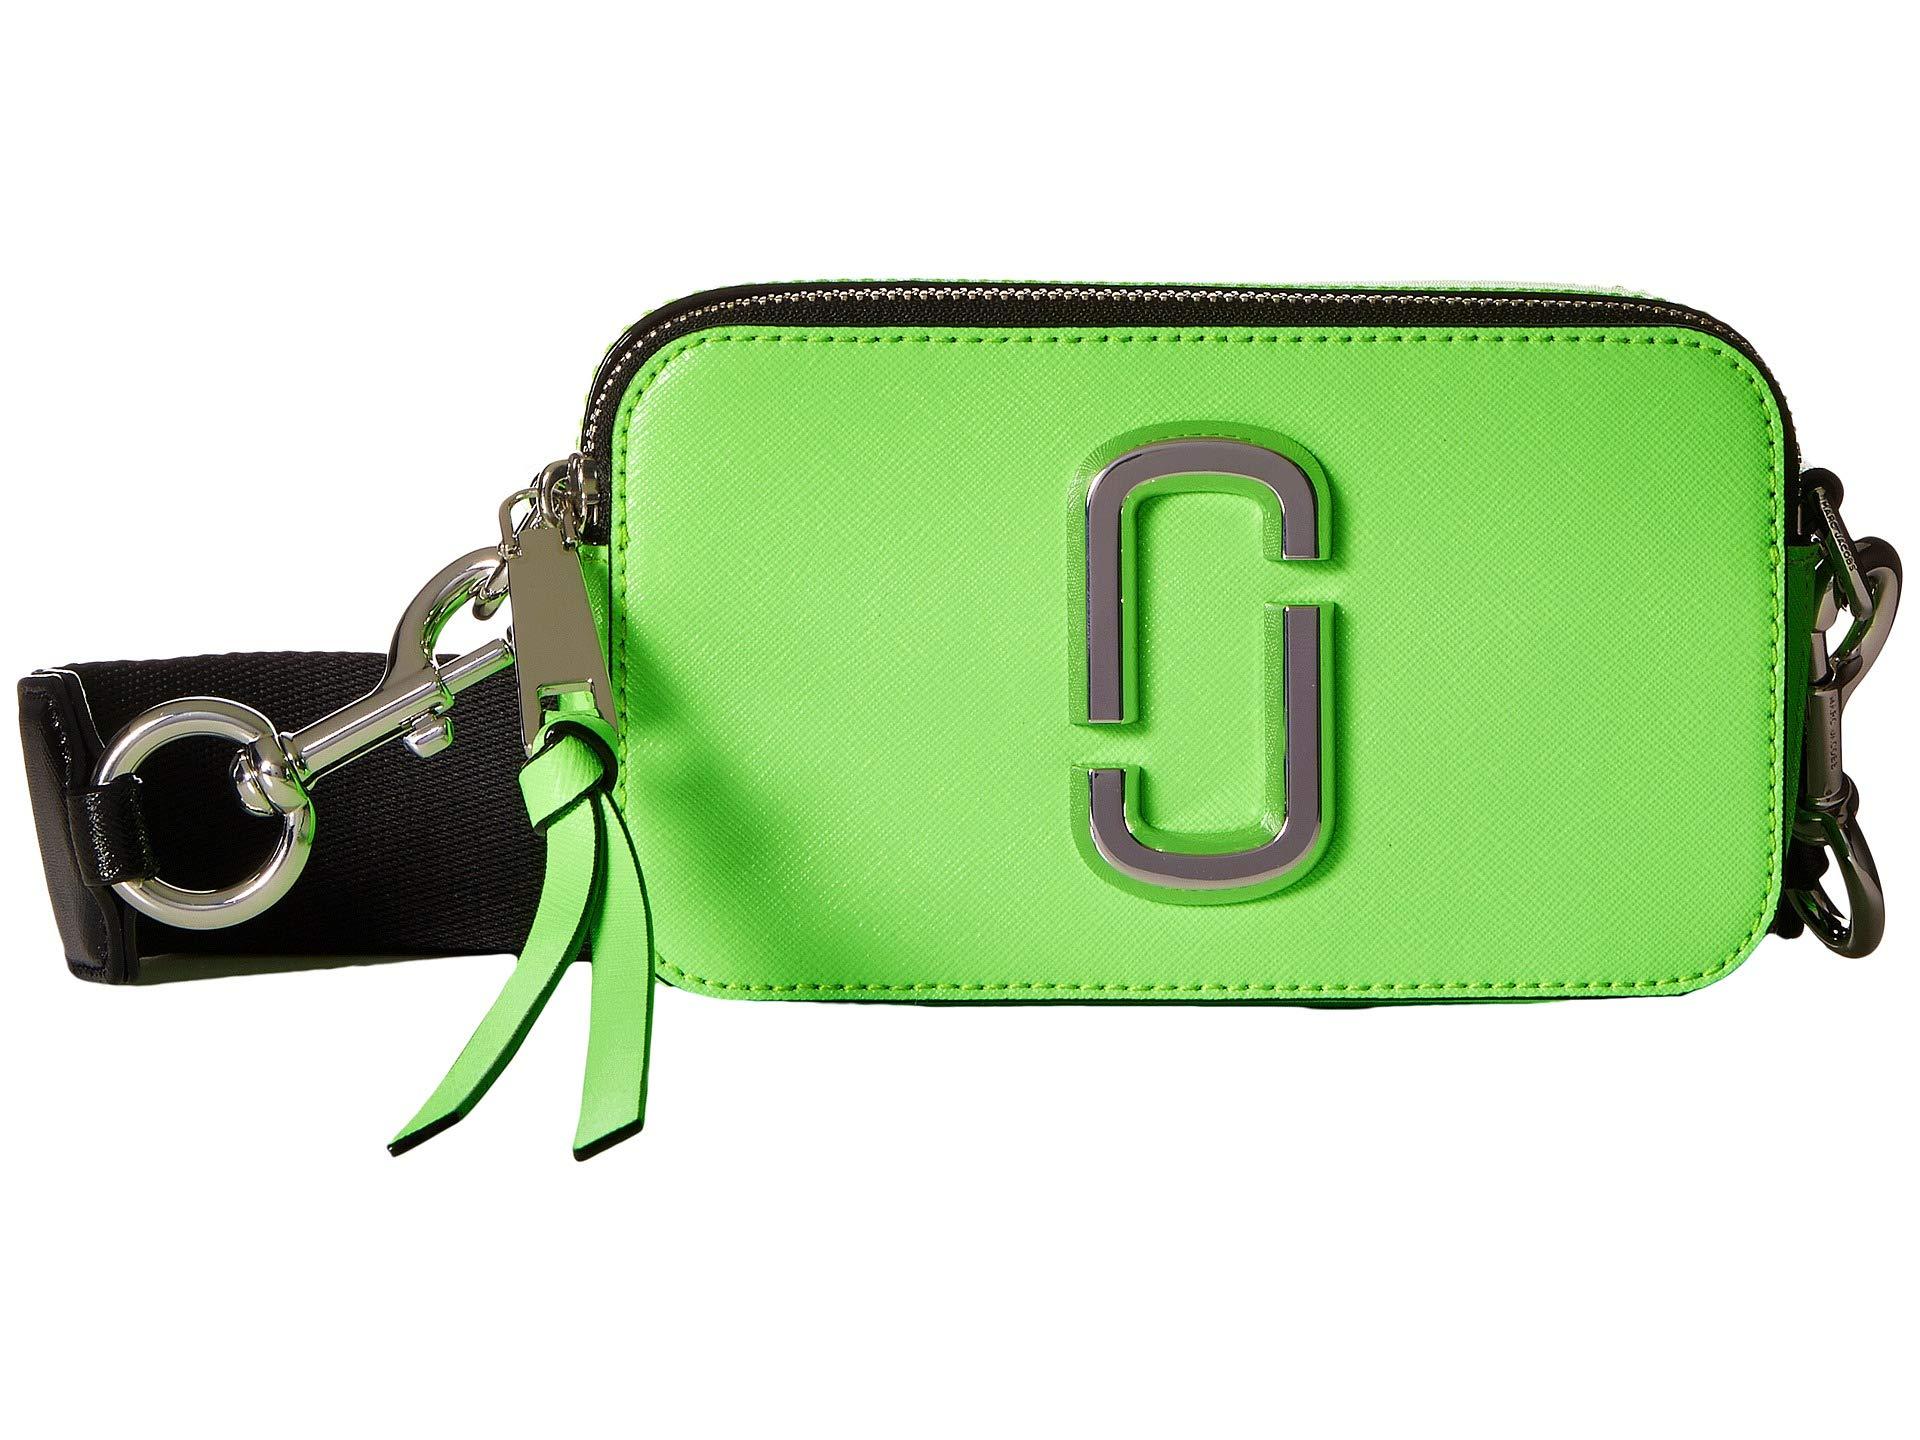 Marc Jacobs The Snapshot Fluoro Leather Camera Bag in Bright Green 